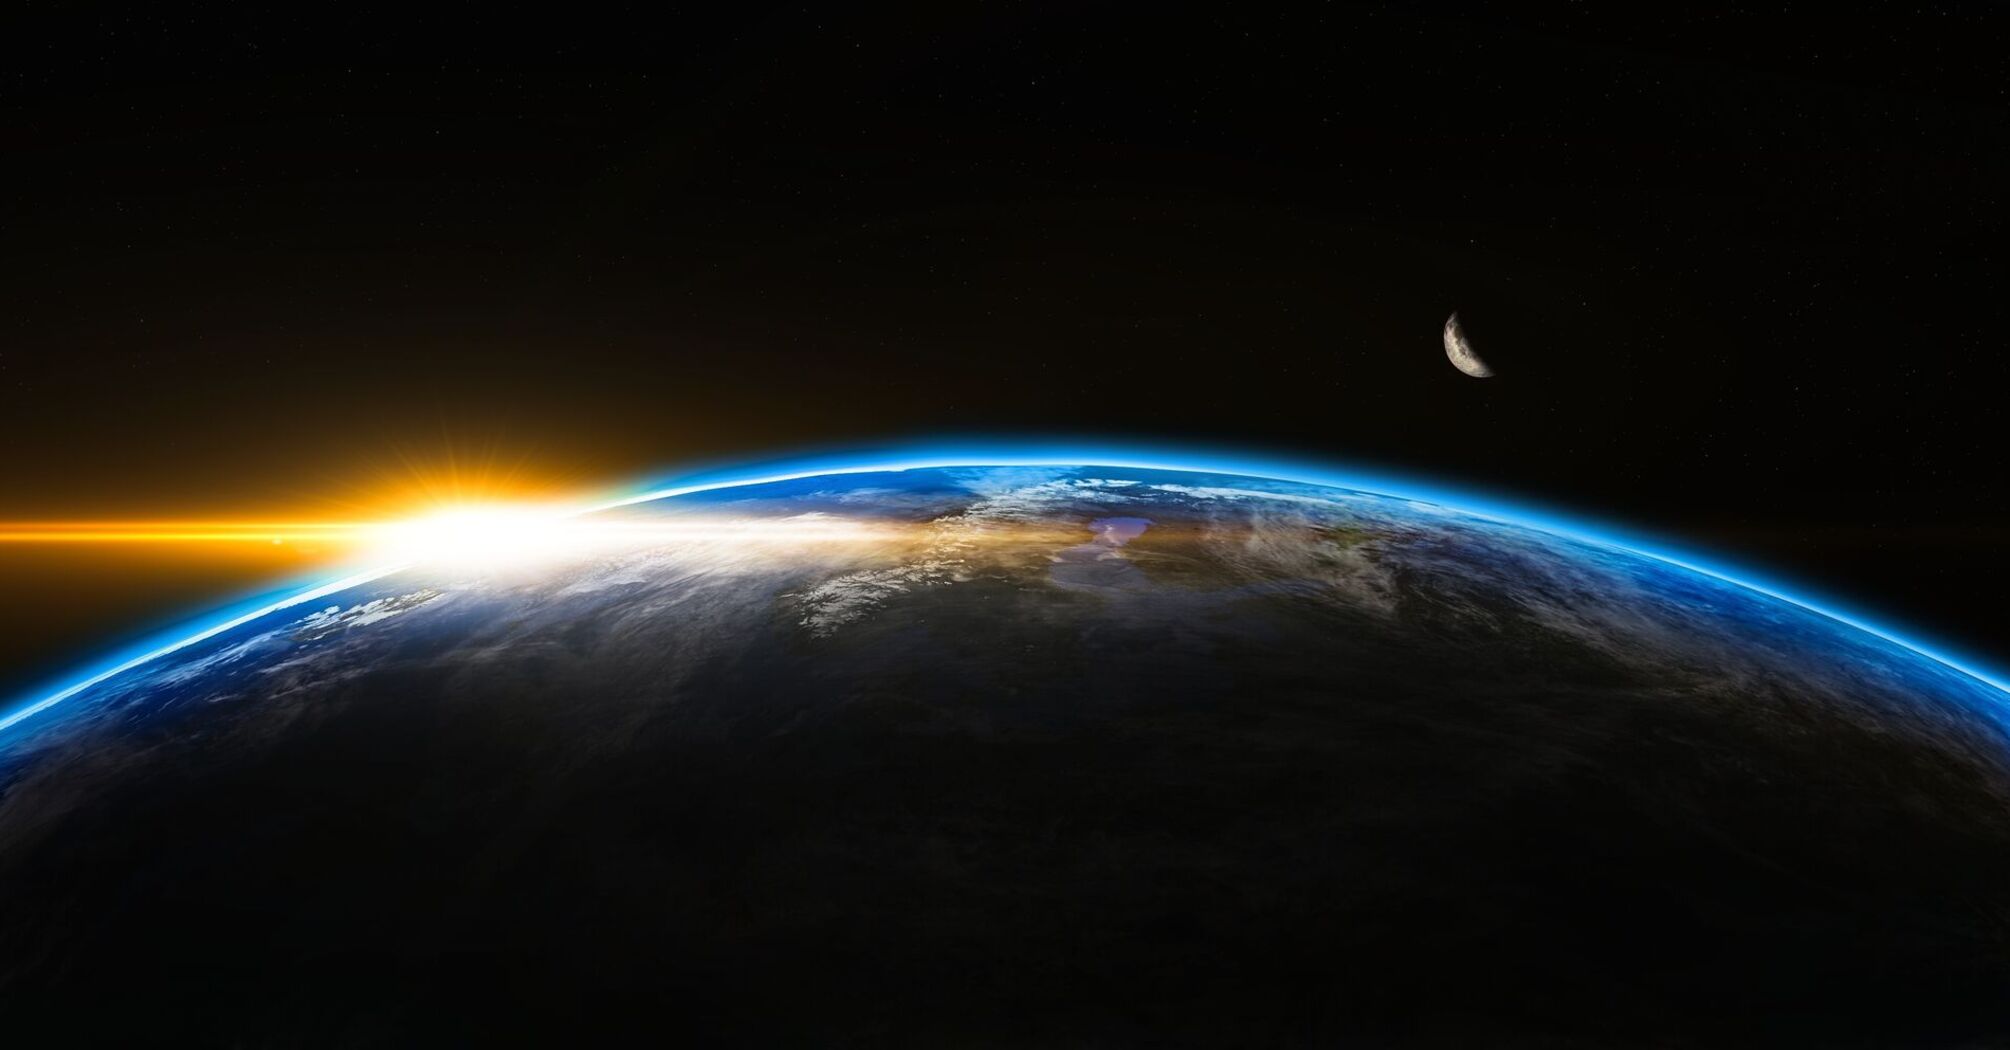 Sunrise over Earth from space, with a bright orange glow on the horizon and a dark night sky in the background